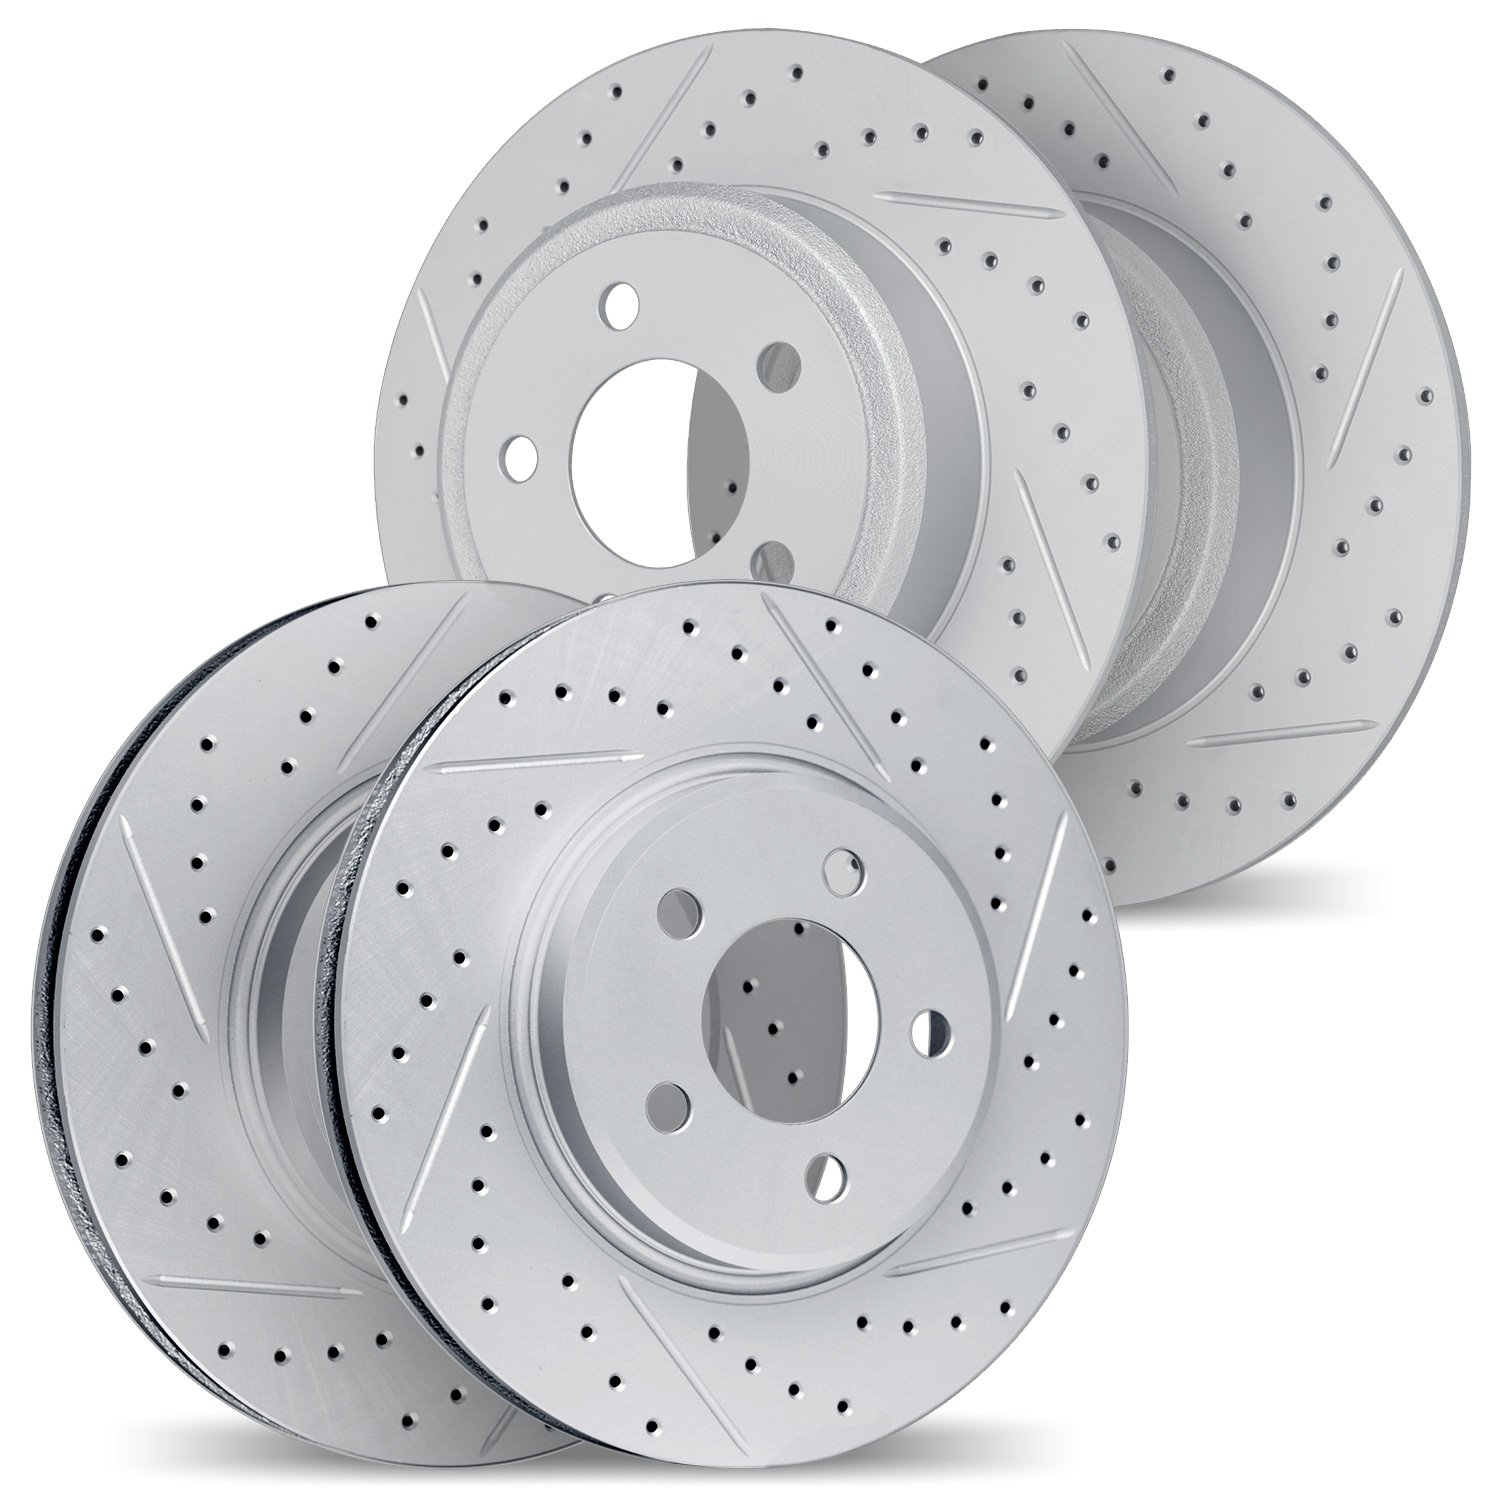 2004-31005 Geoperformance Drilled/Slotted Brake Rotors, Fits Select Multiple Makes/Models, Position: Front and Rear